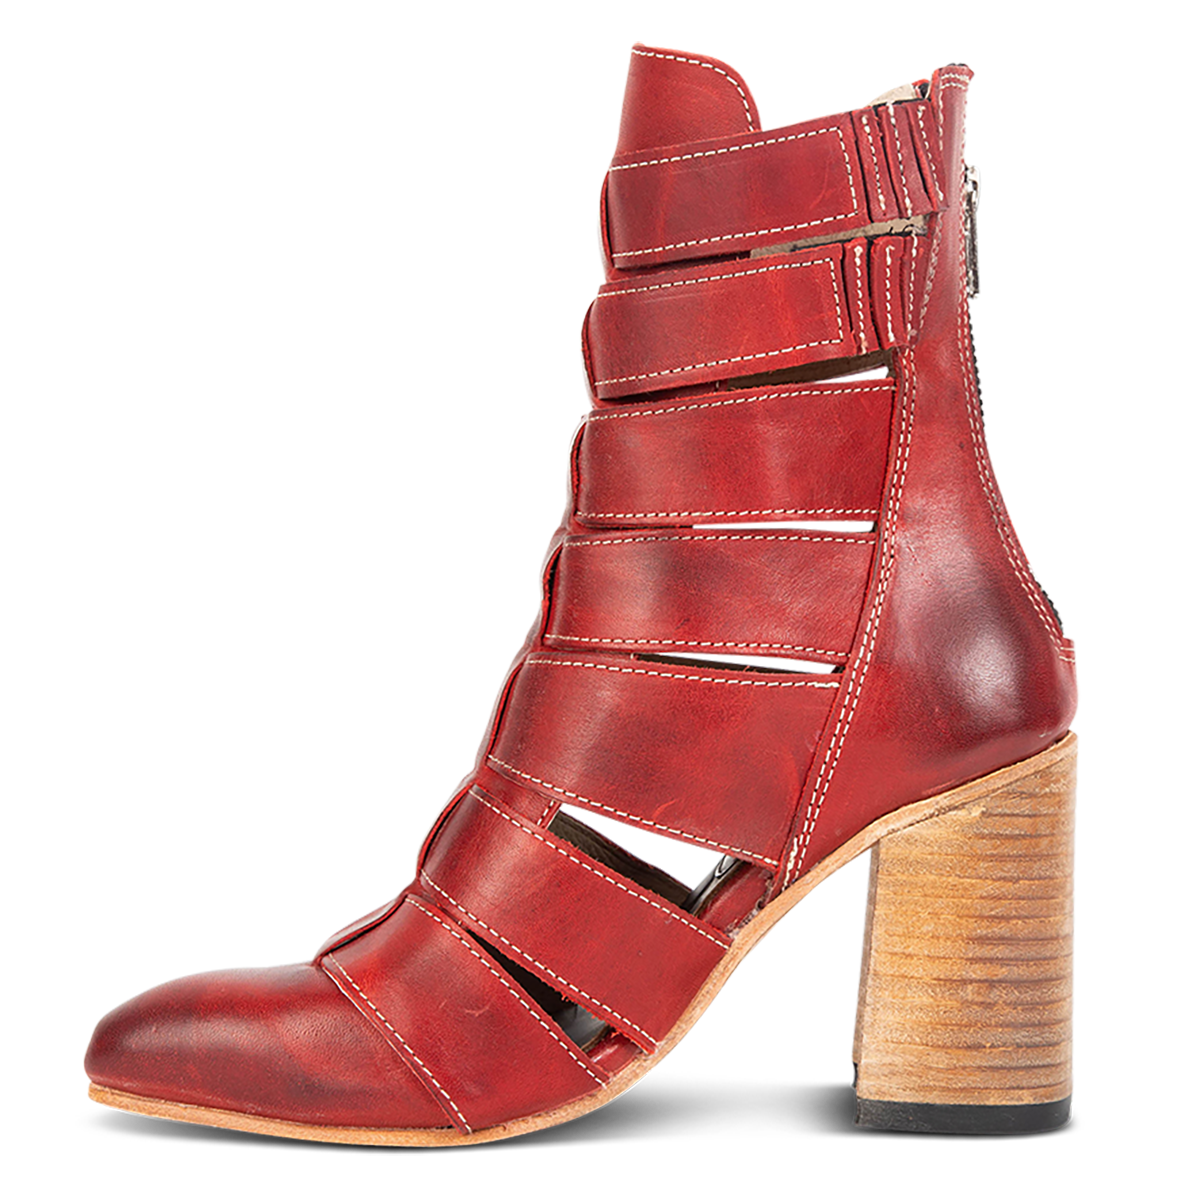 Inside view showing elastic gore detailing on FREEBIRD women's Jagger red leather pointed toe bootie